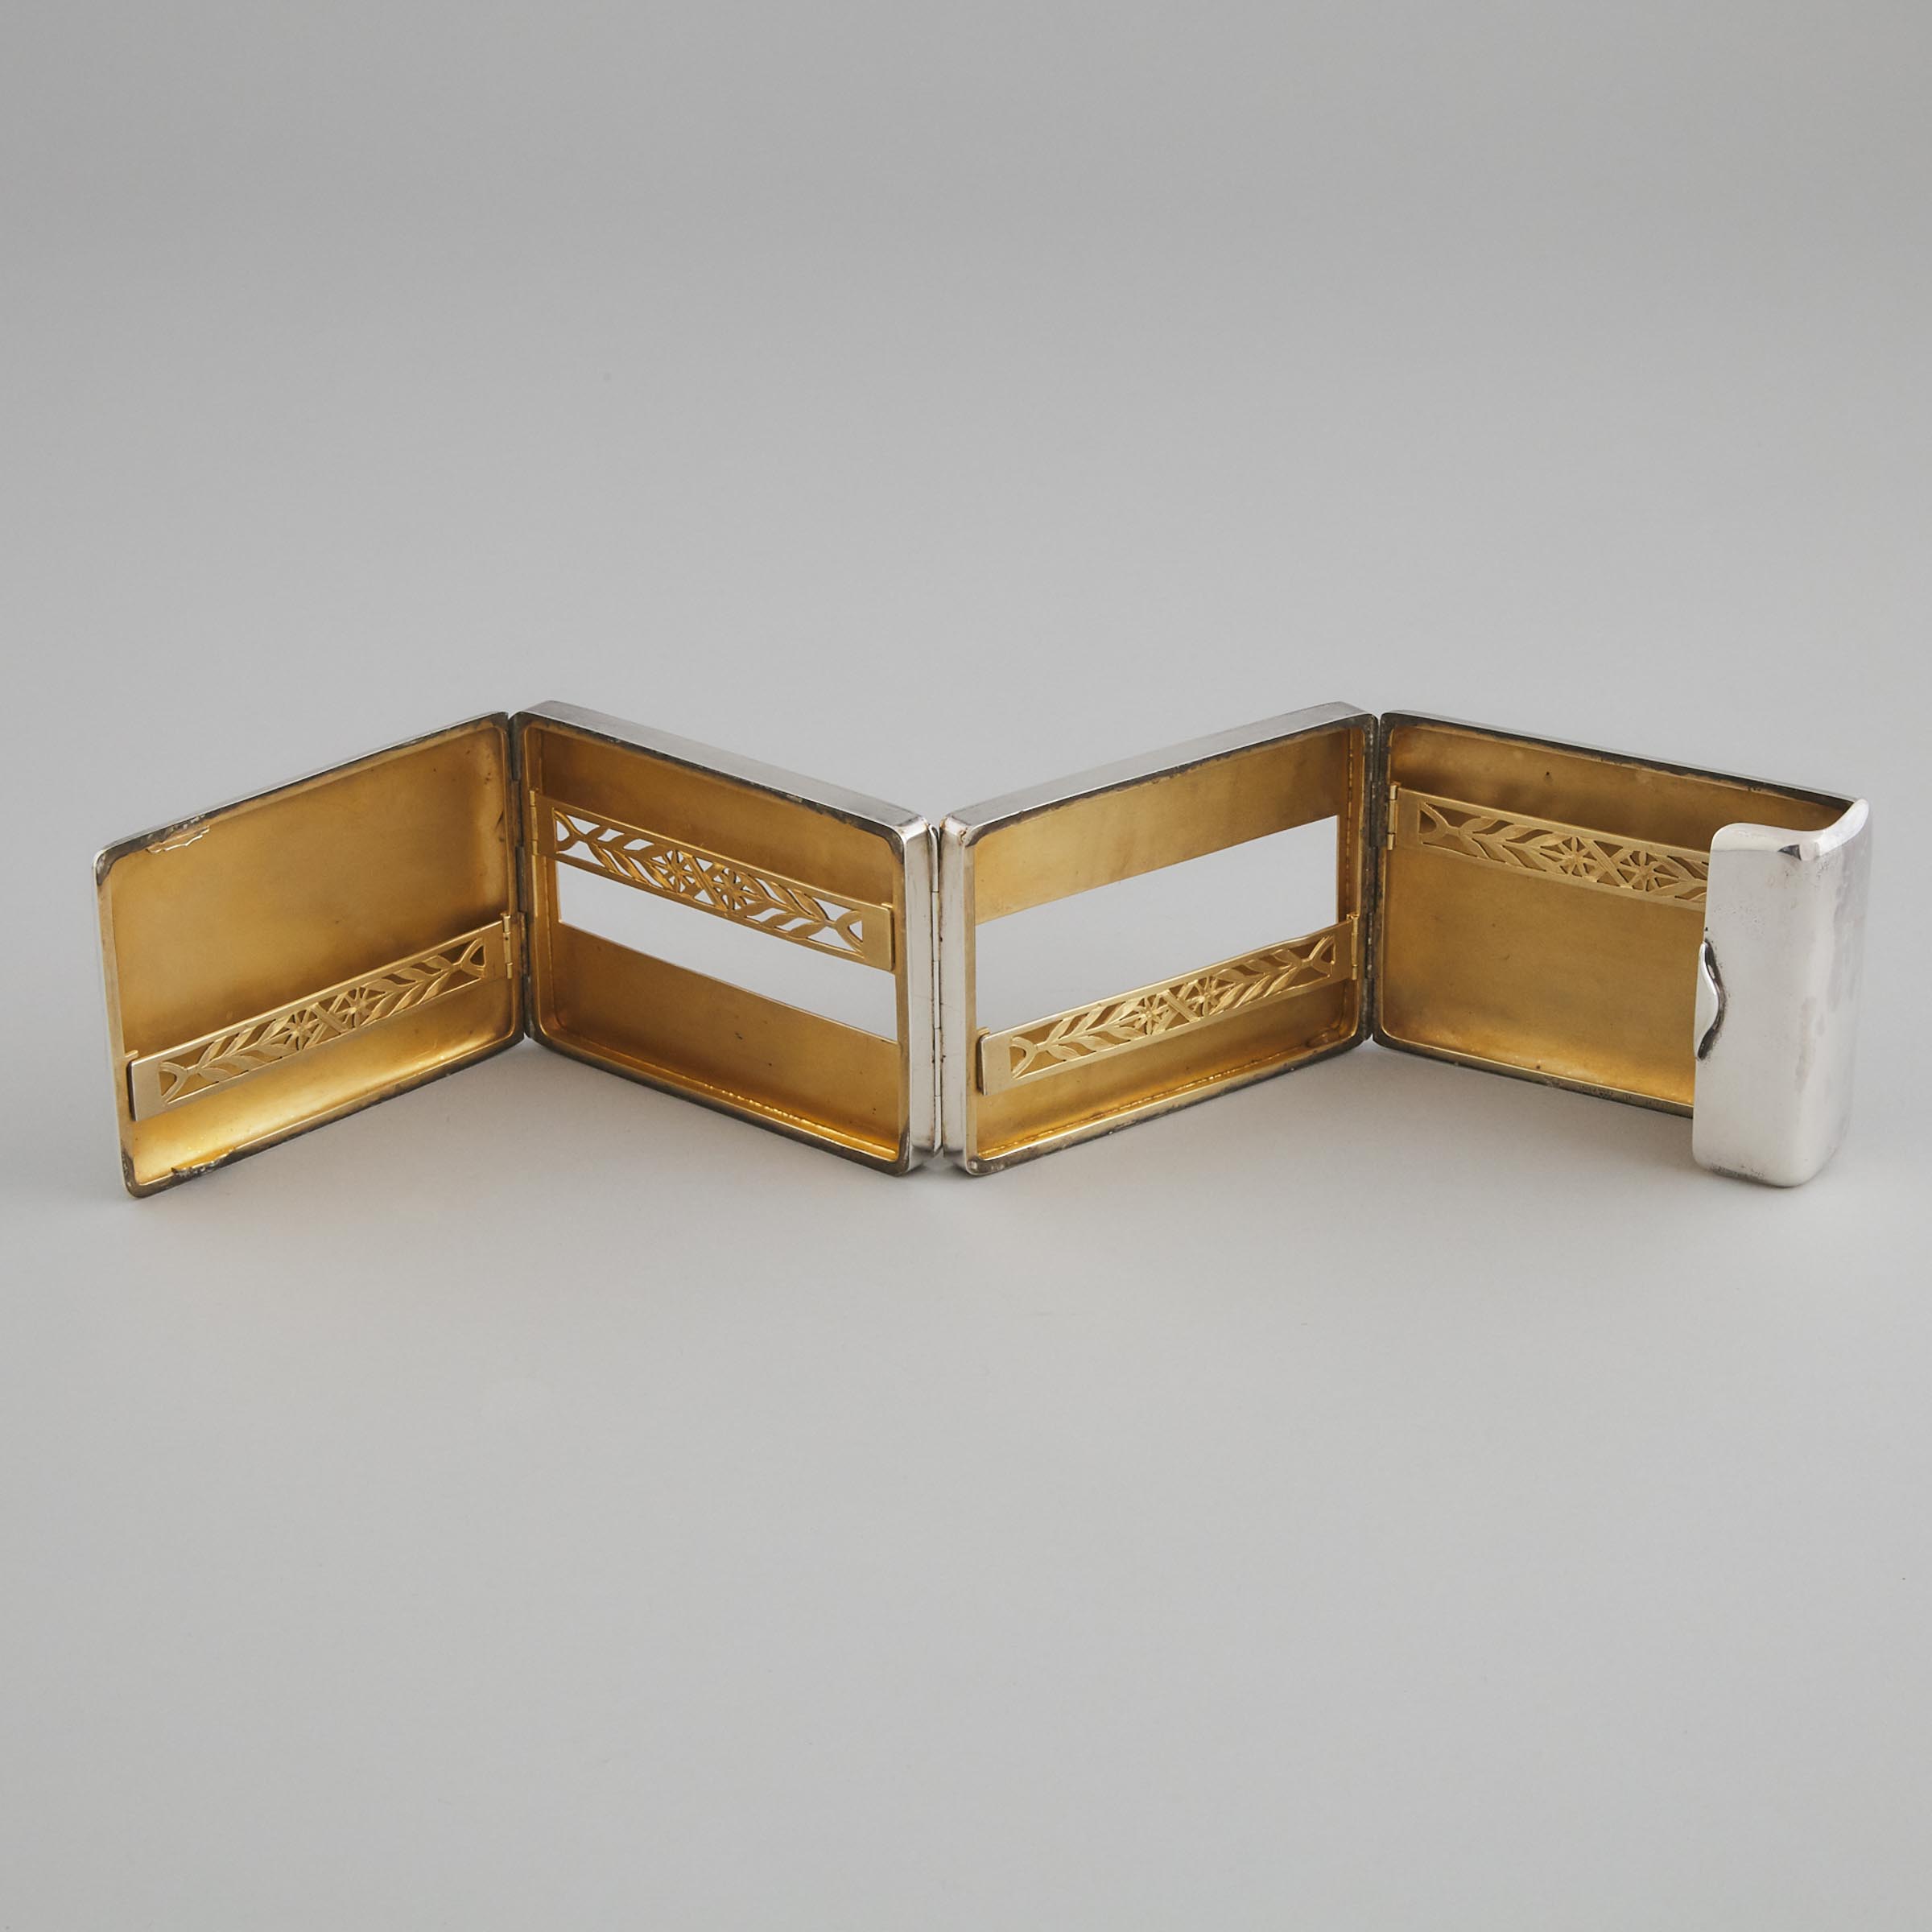 American Silver Four-Section Folding Cigarette Case, Mauser Mfg. Co., New York, N.Y., early 20th century